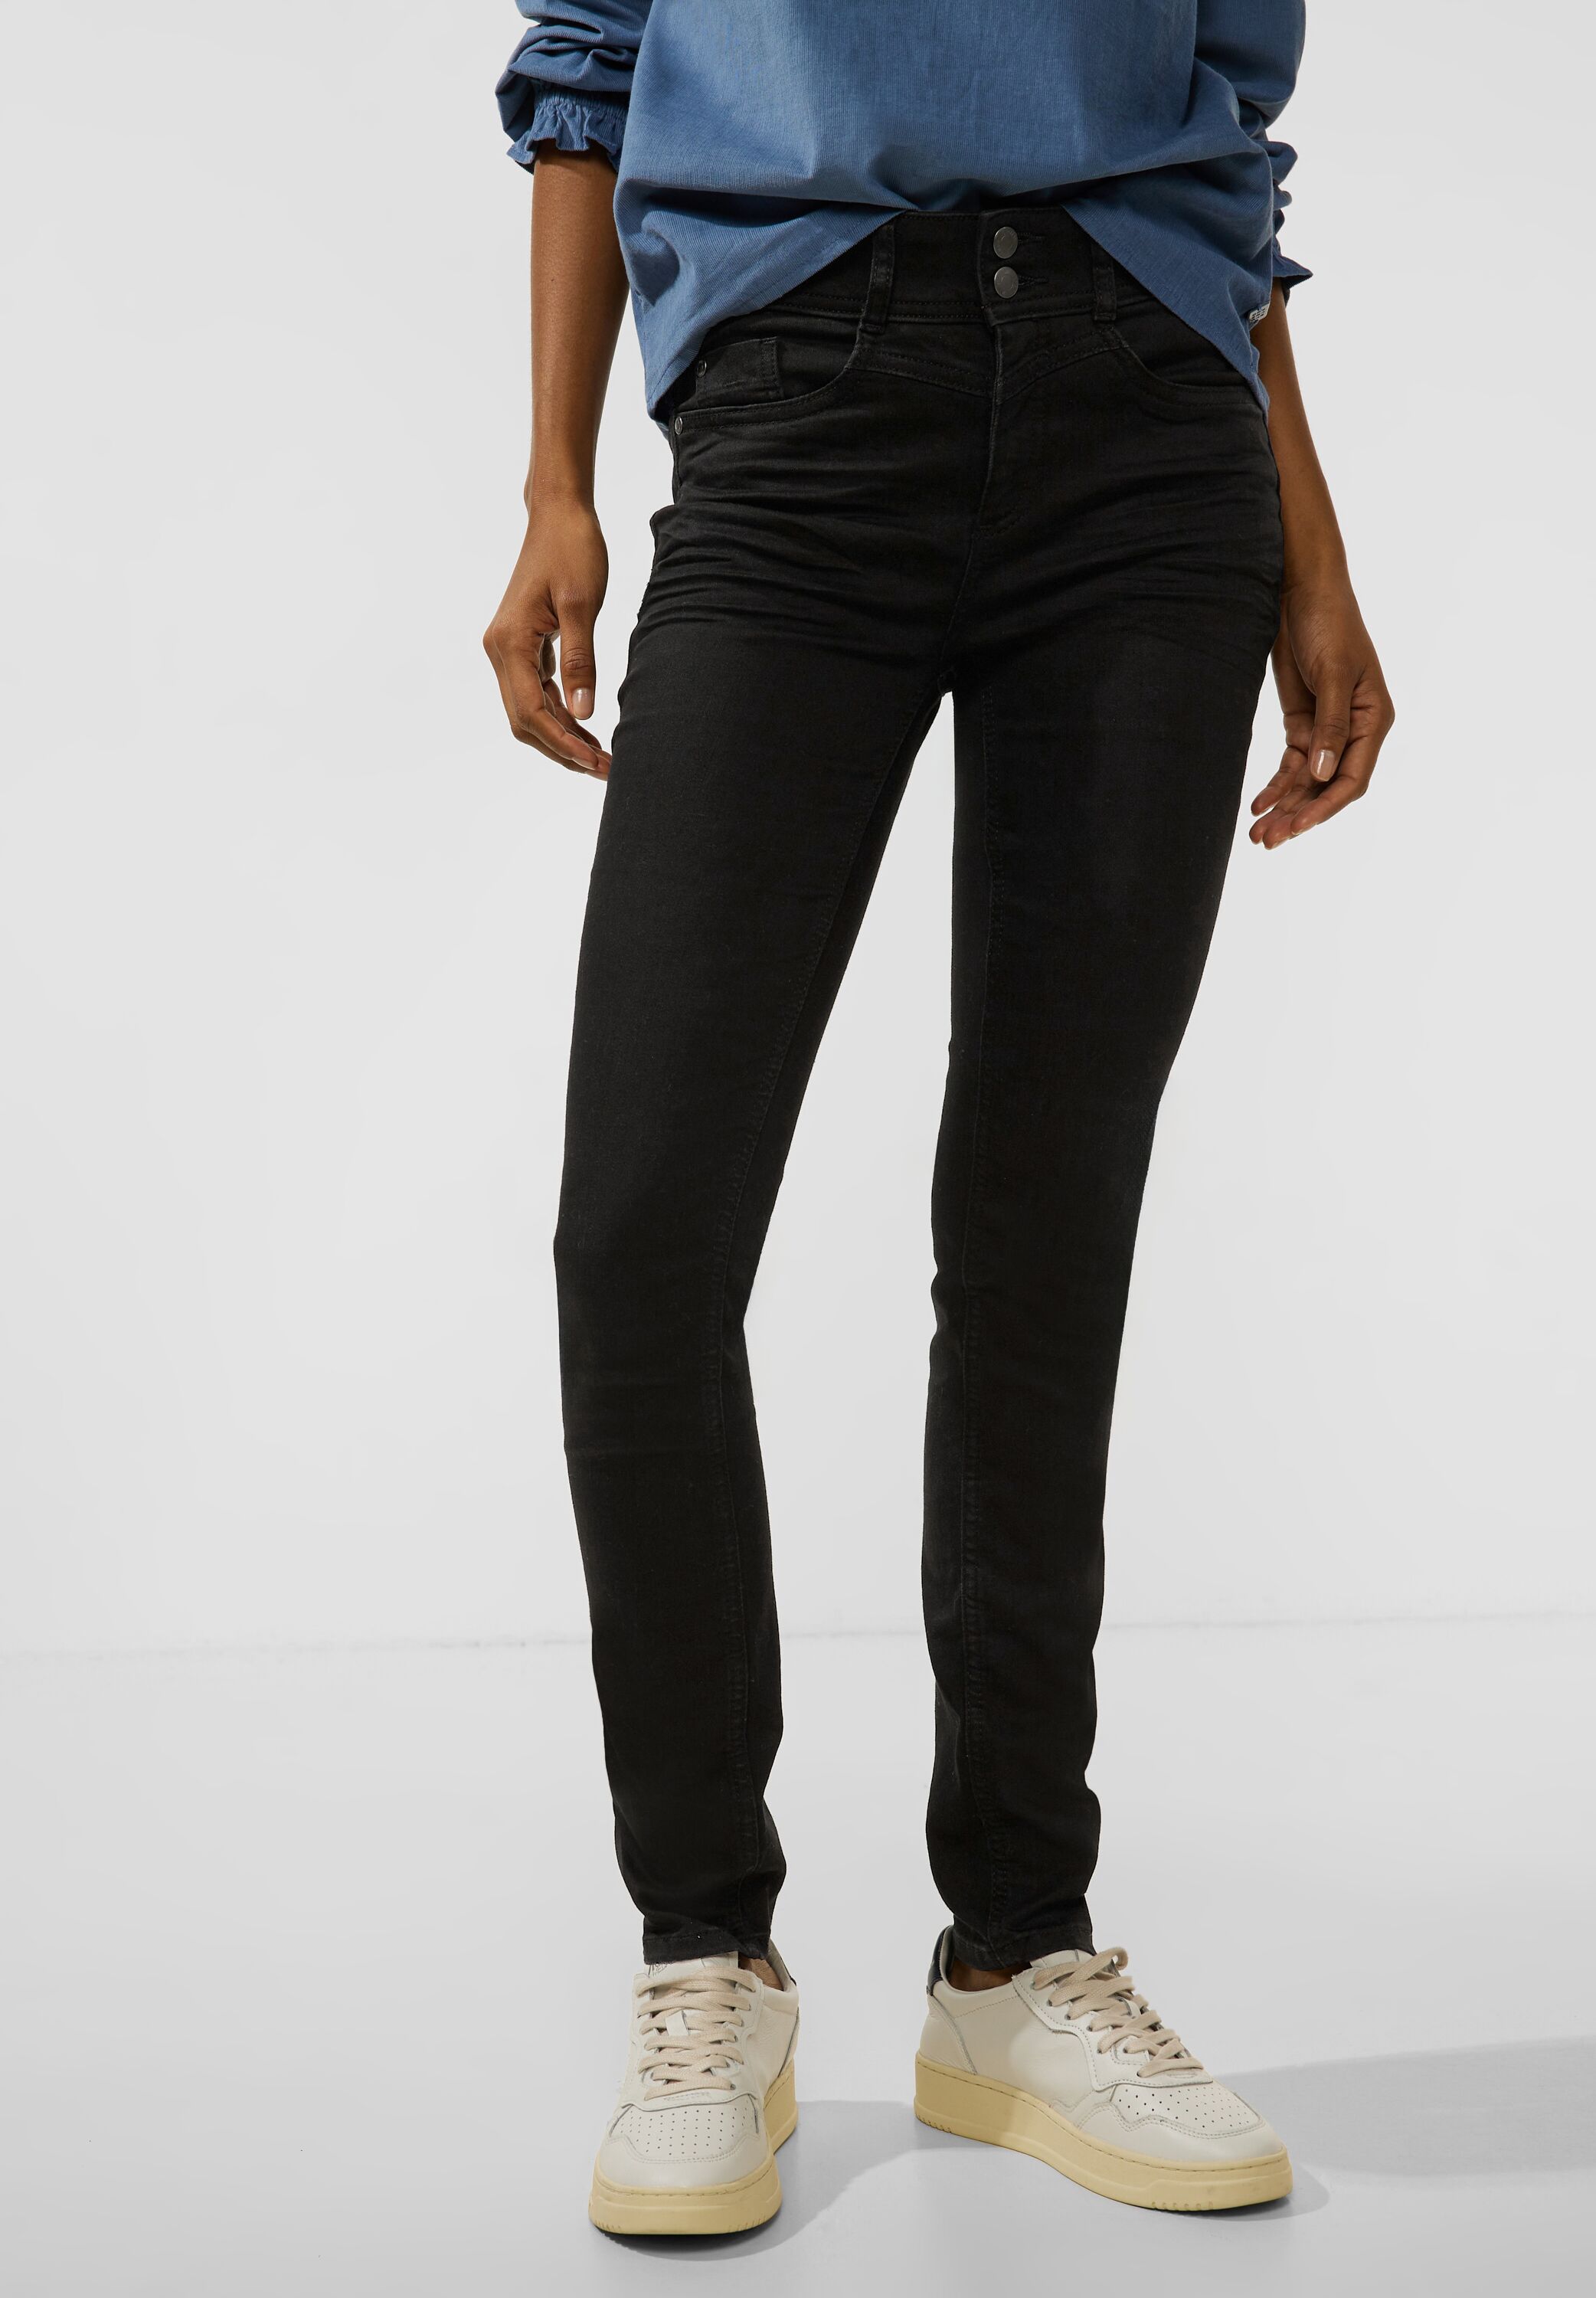 Street One Jeans York A376539-15111 Black Rinsed in - Wash Mode CONCEPT